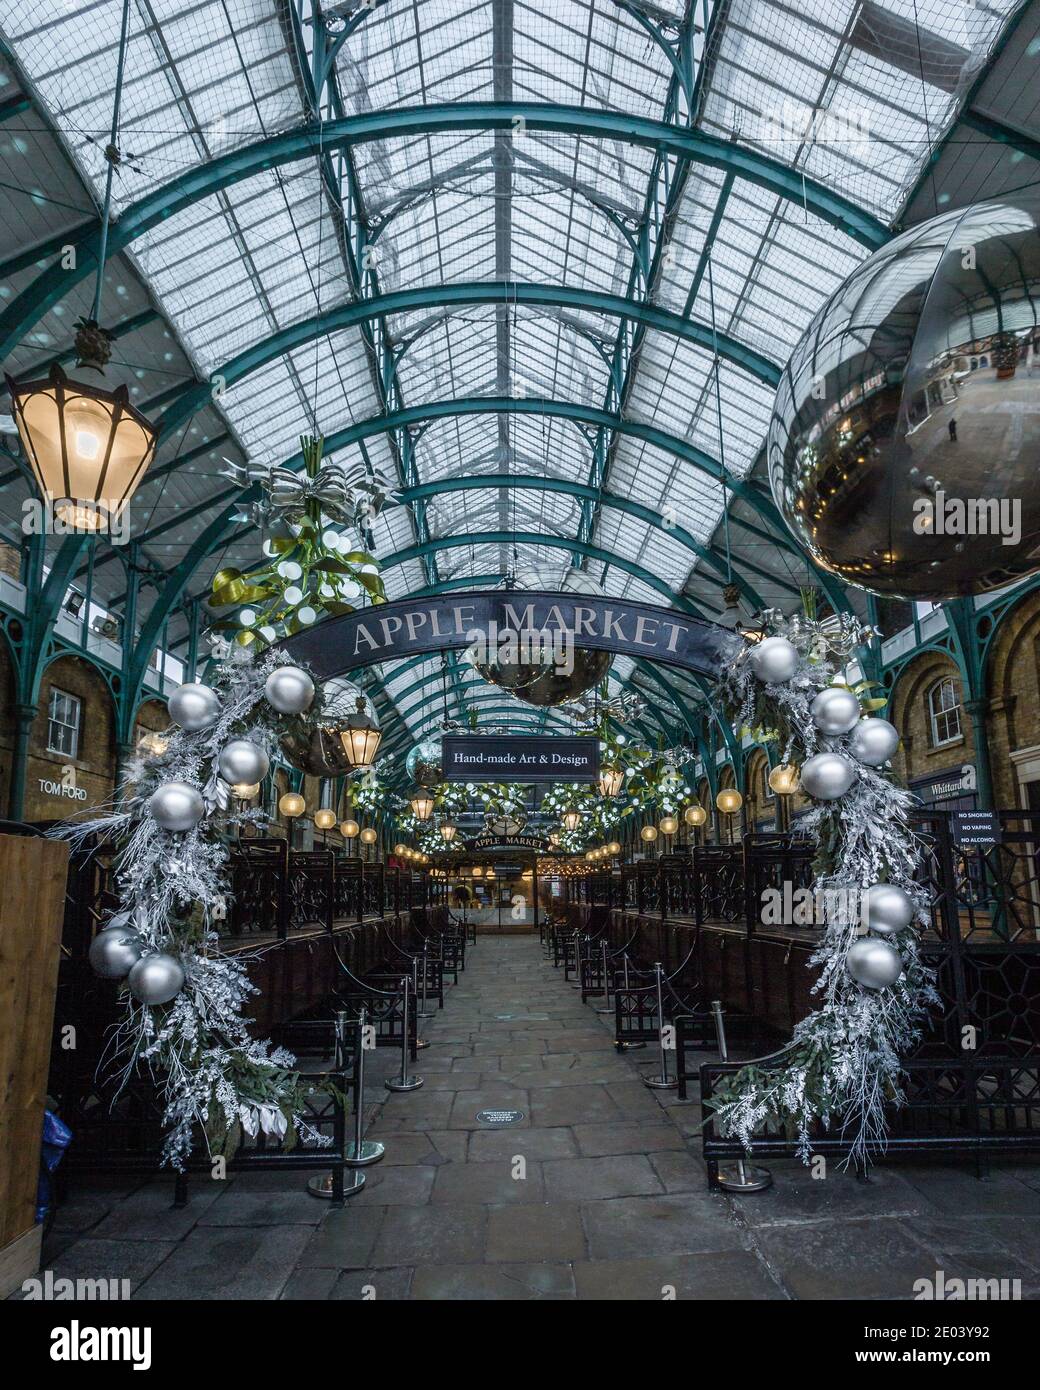 Apple Market in Covent Garden, London with Christmas decorations. Stock Photo